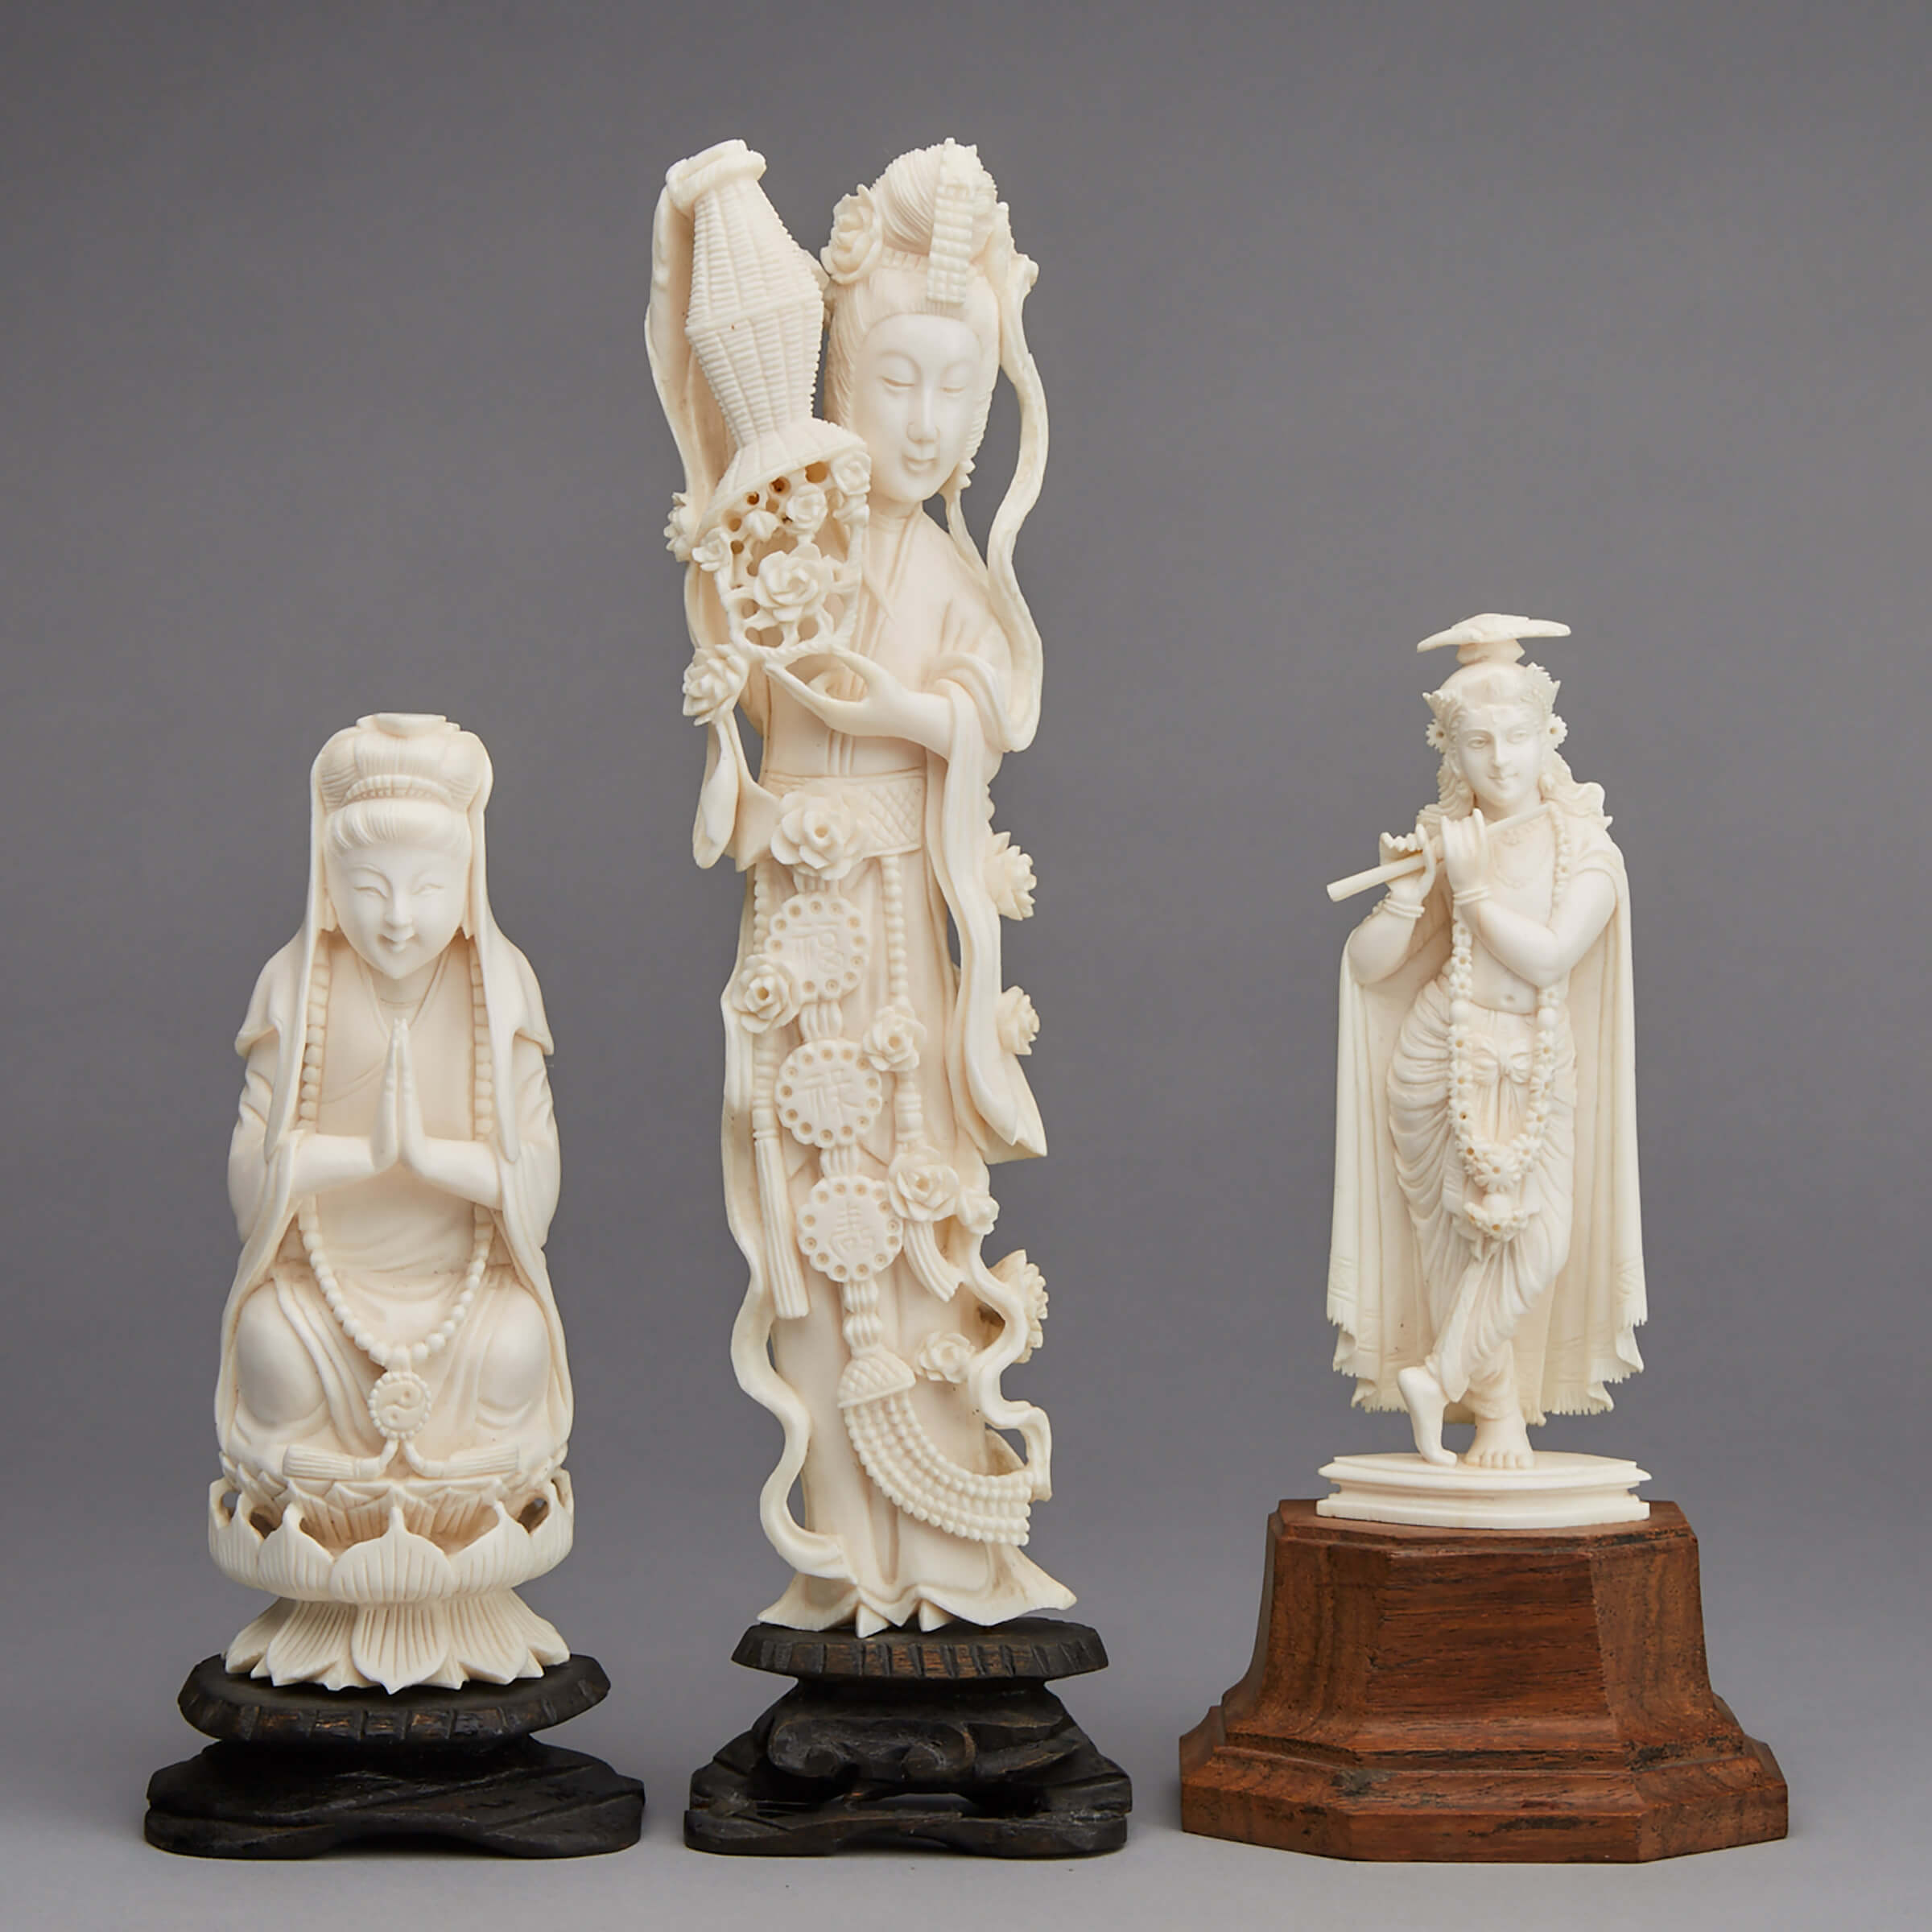 A Group of Three Ivory Carvings